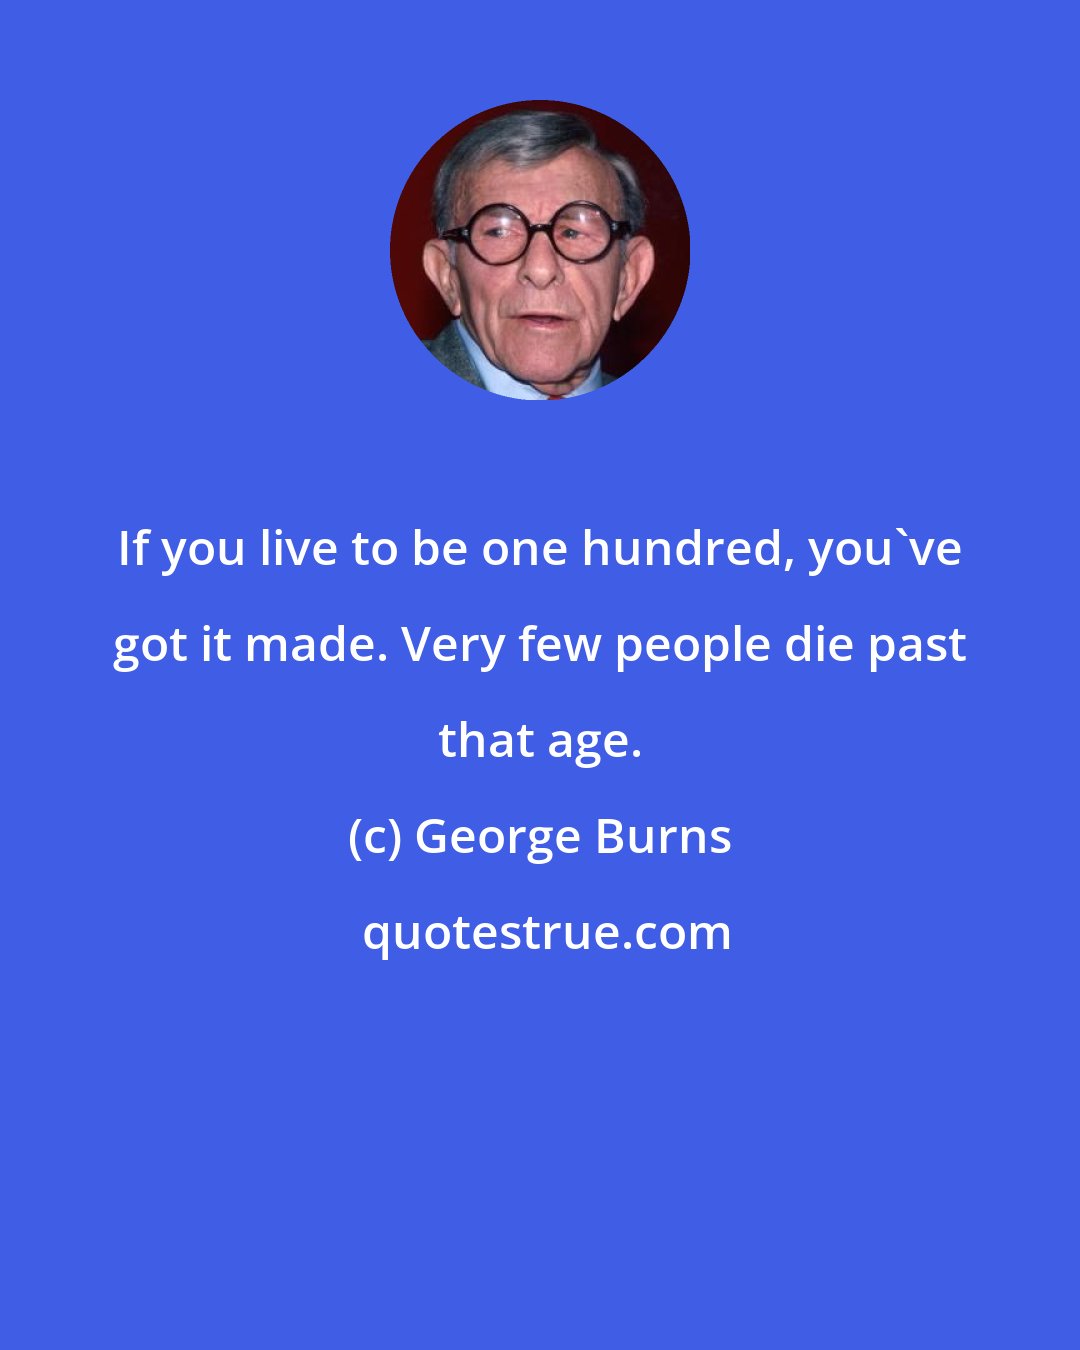 George Burns: If you live to be one hundred, you've got it made. Very few people die past that age.